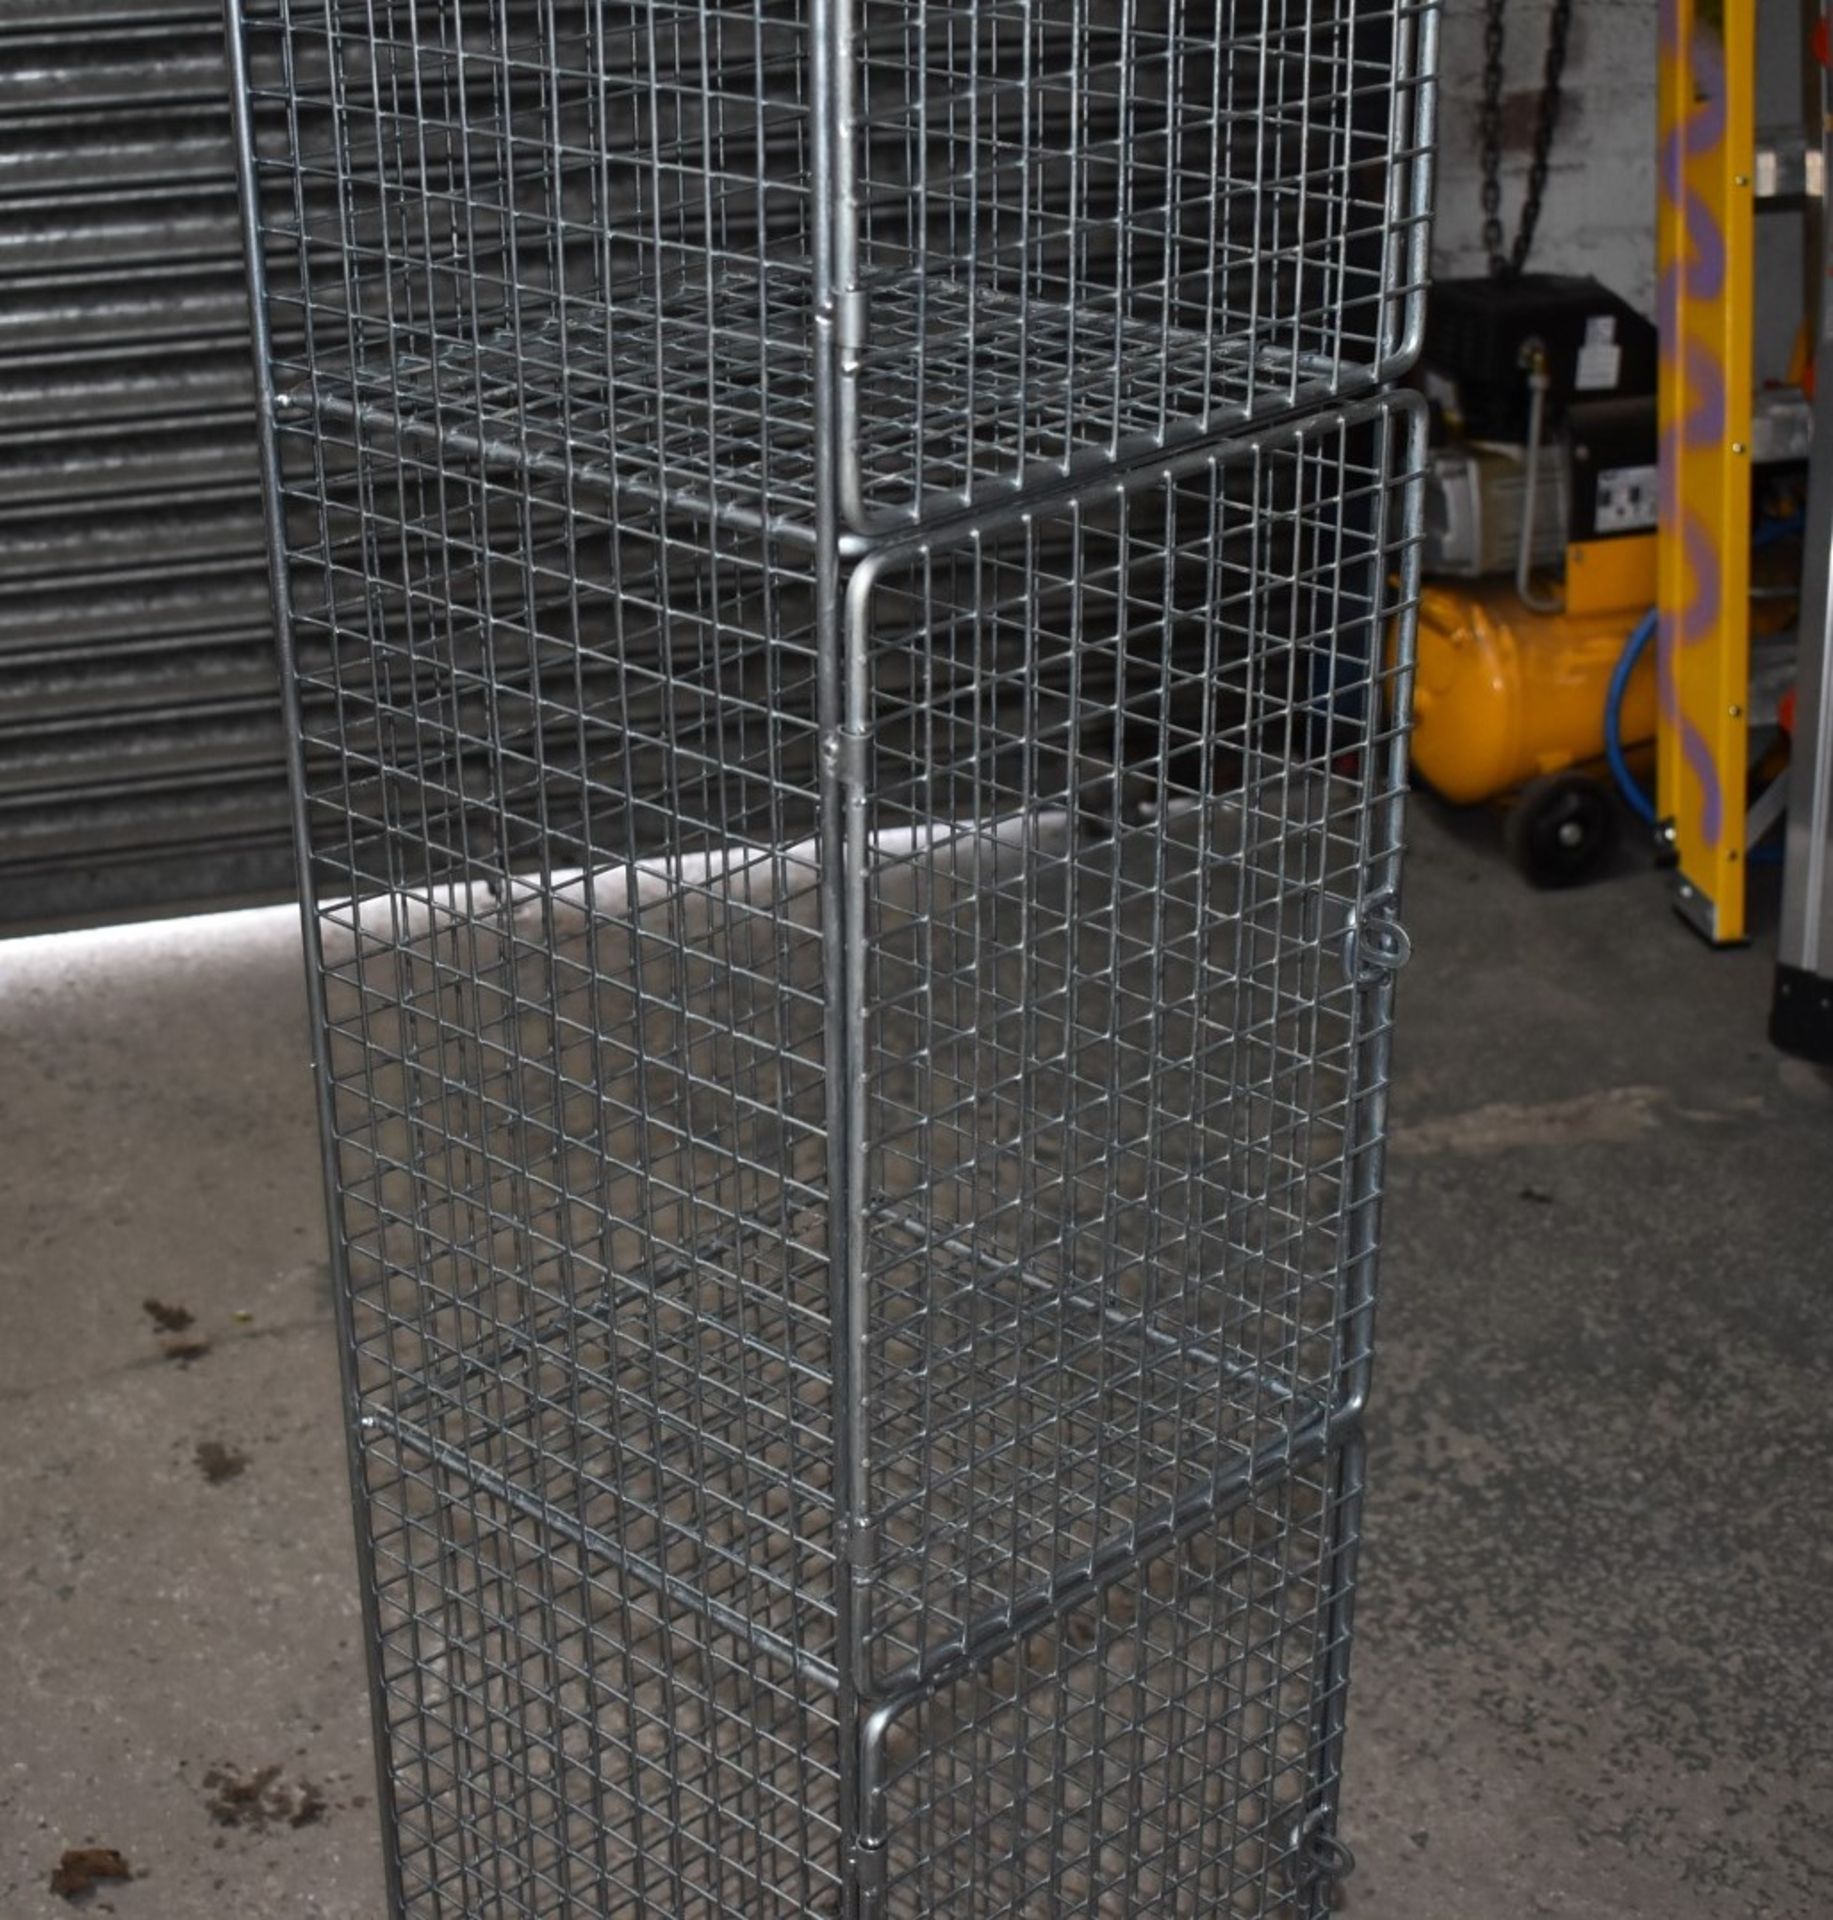 1 x Wire Mesh Cage Lockers With Four Locker Compartments - Dimensions: H193 x W30 x D32 cms - Ref: - Image 10 of 11